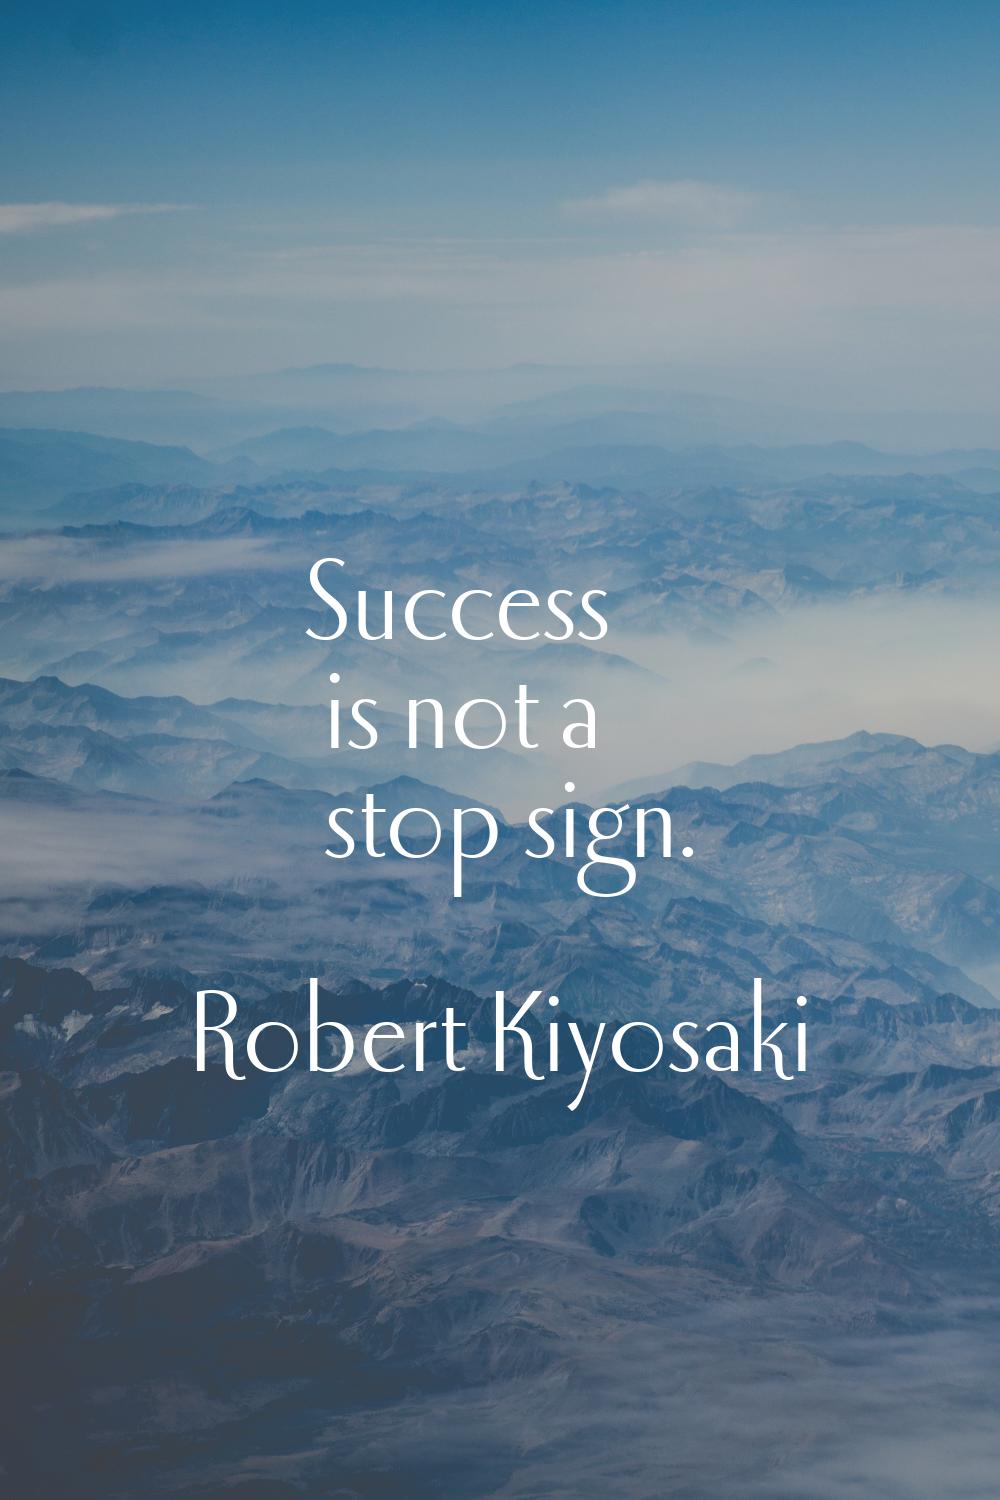 Success is not a stop sign.